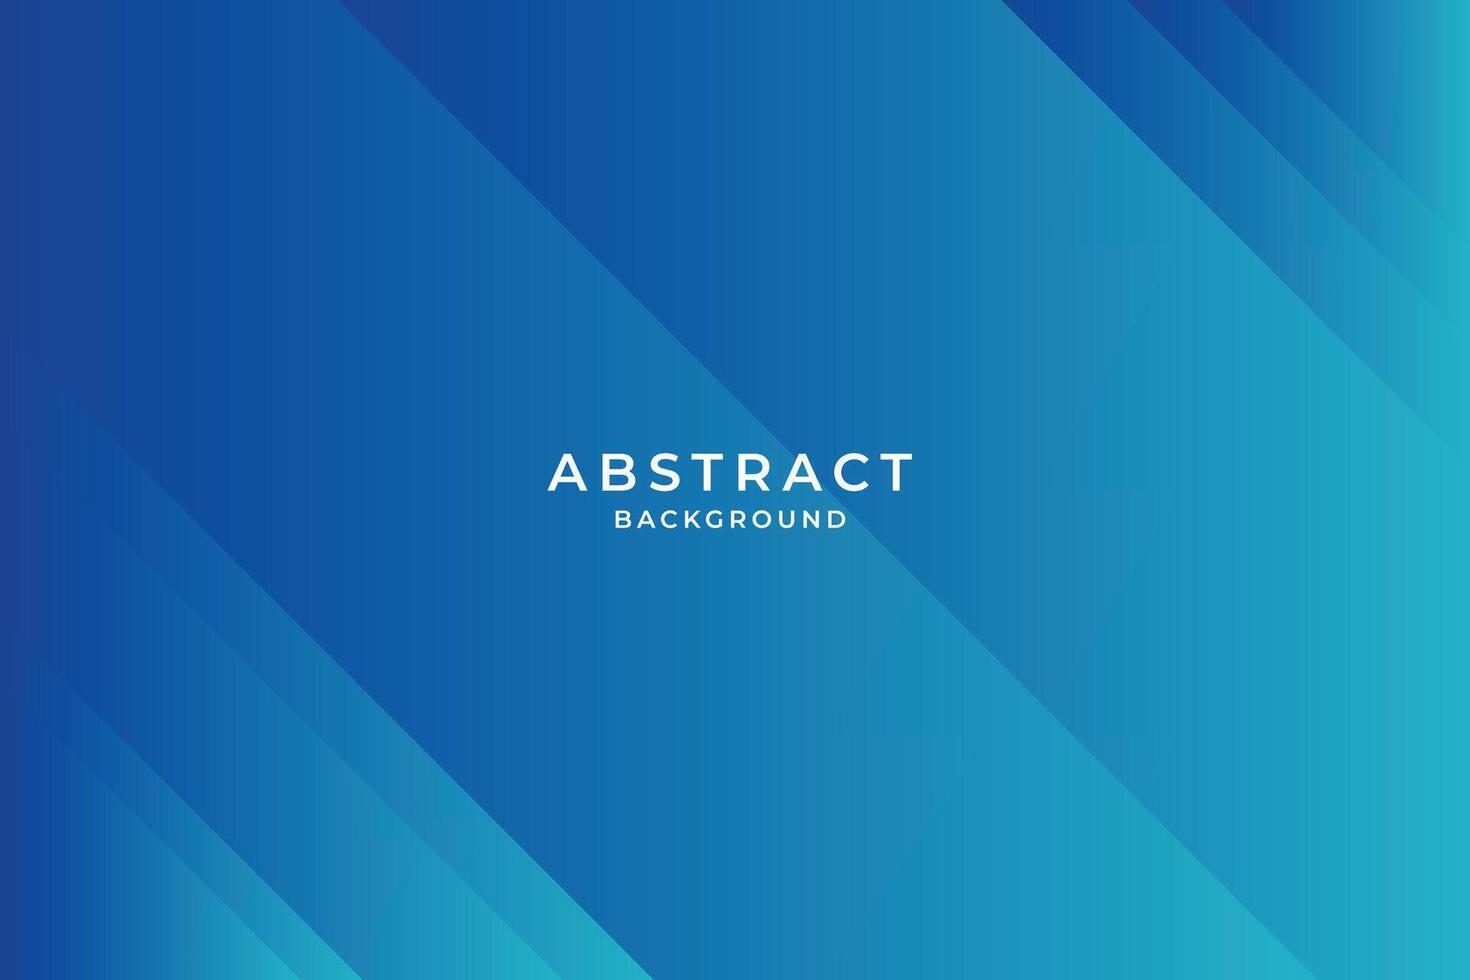 Abstract blue curvy shapes background Free Vector